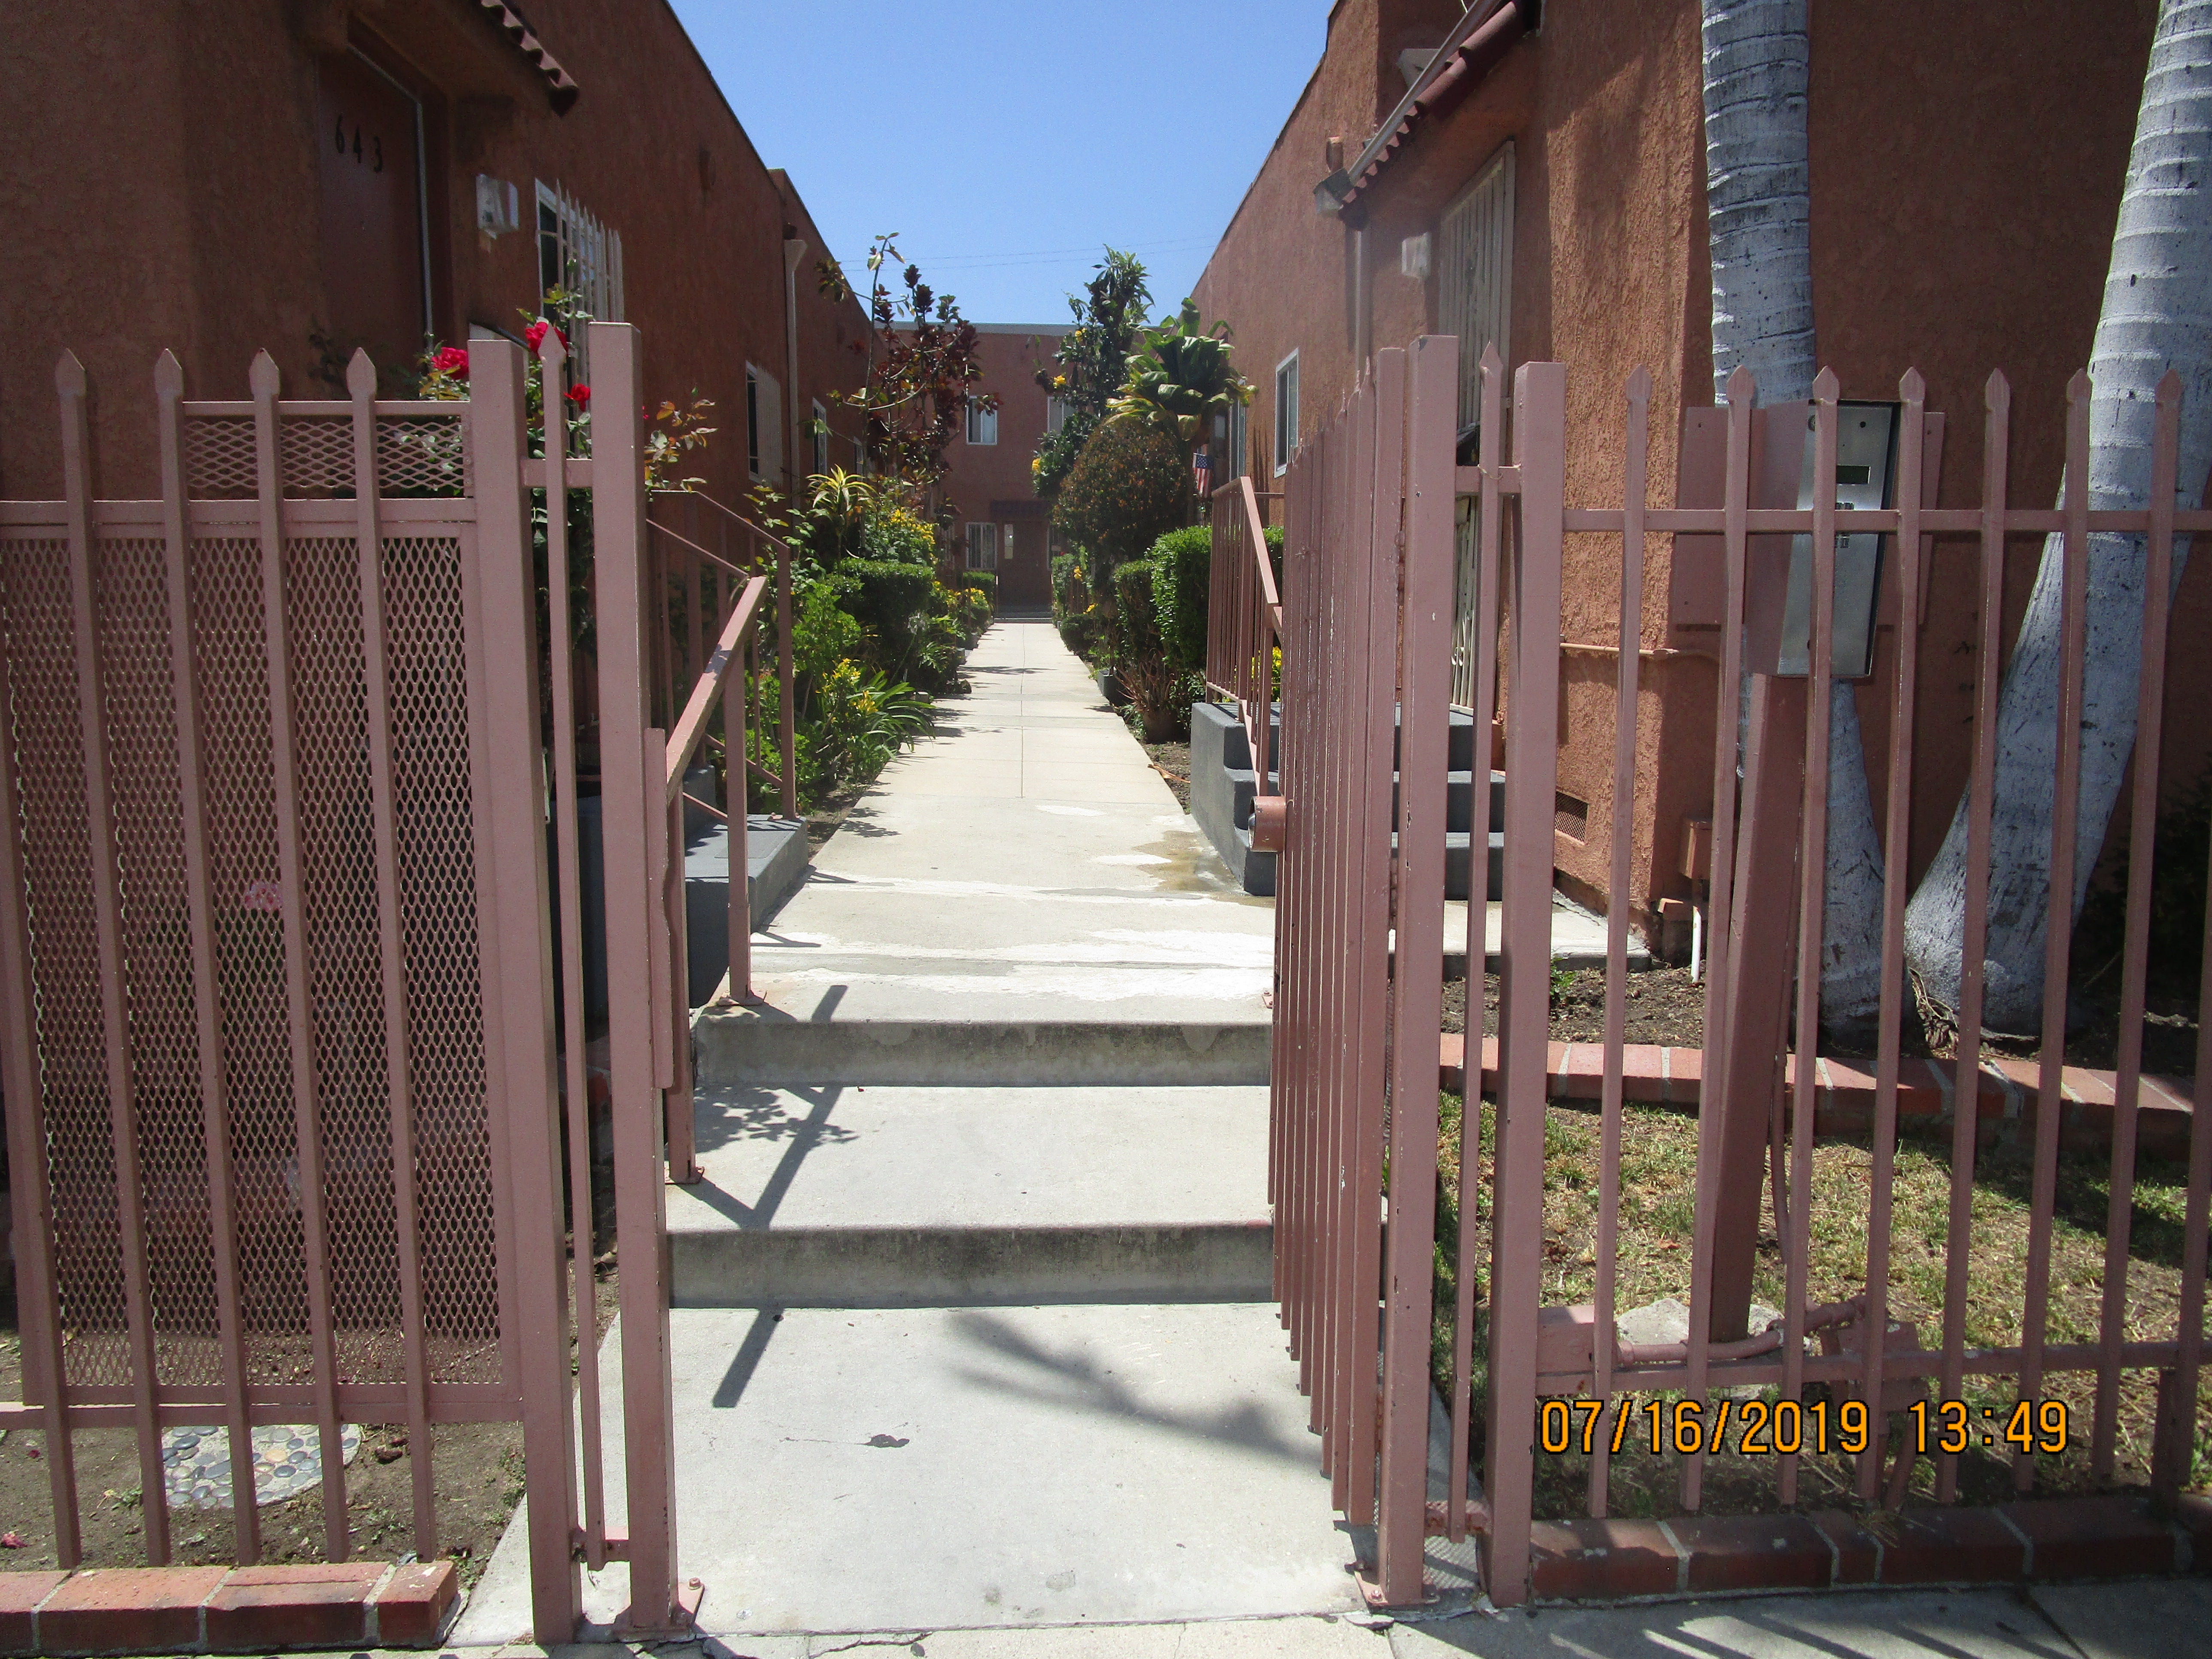 Close up view of a gated entrance to the building showing the pathway in between the units